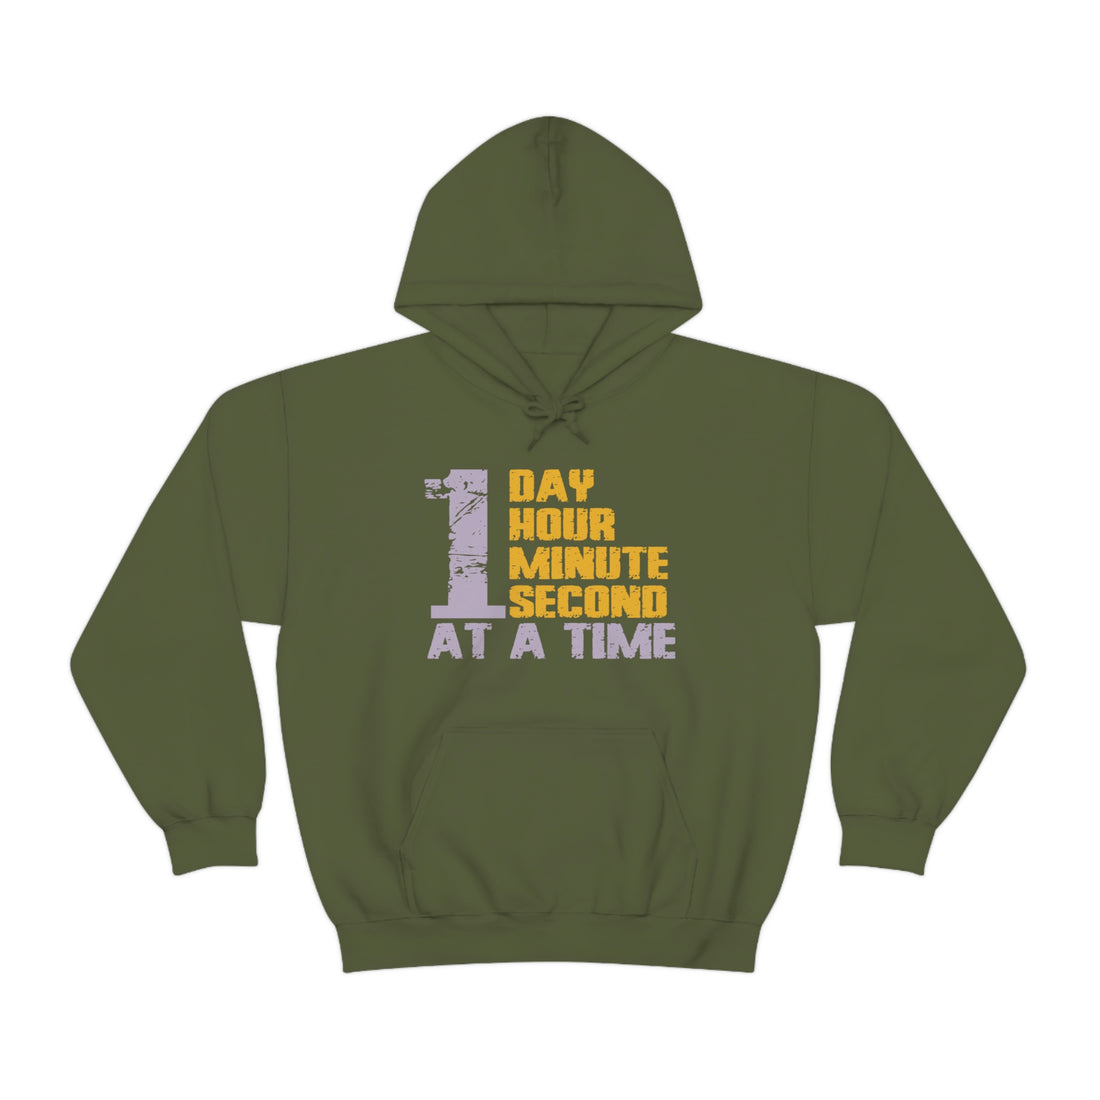 1 Day Hour Minute Second At A Time - Unisex Heavy Blend™ Hooded Sweatshirt